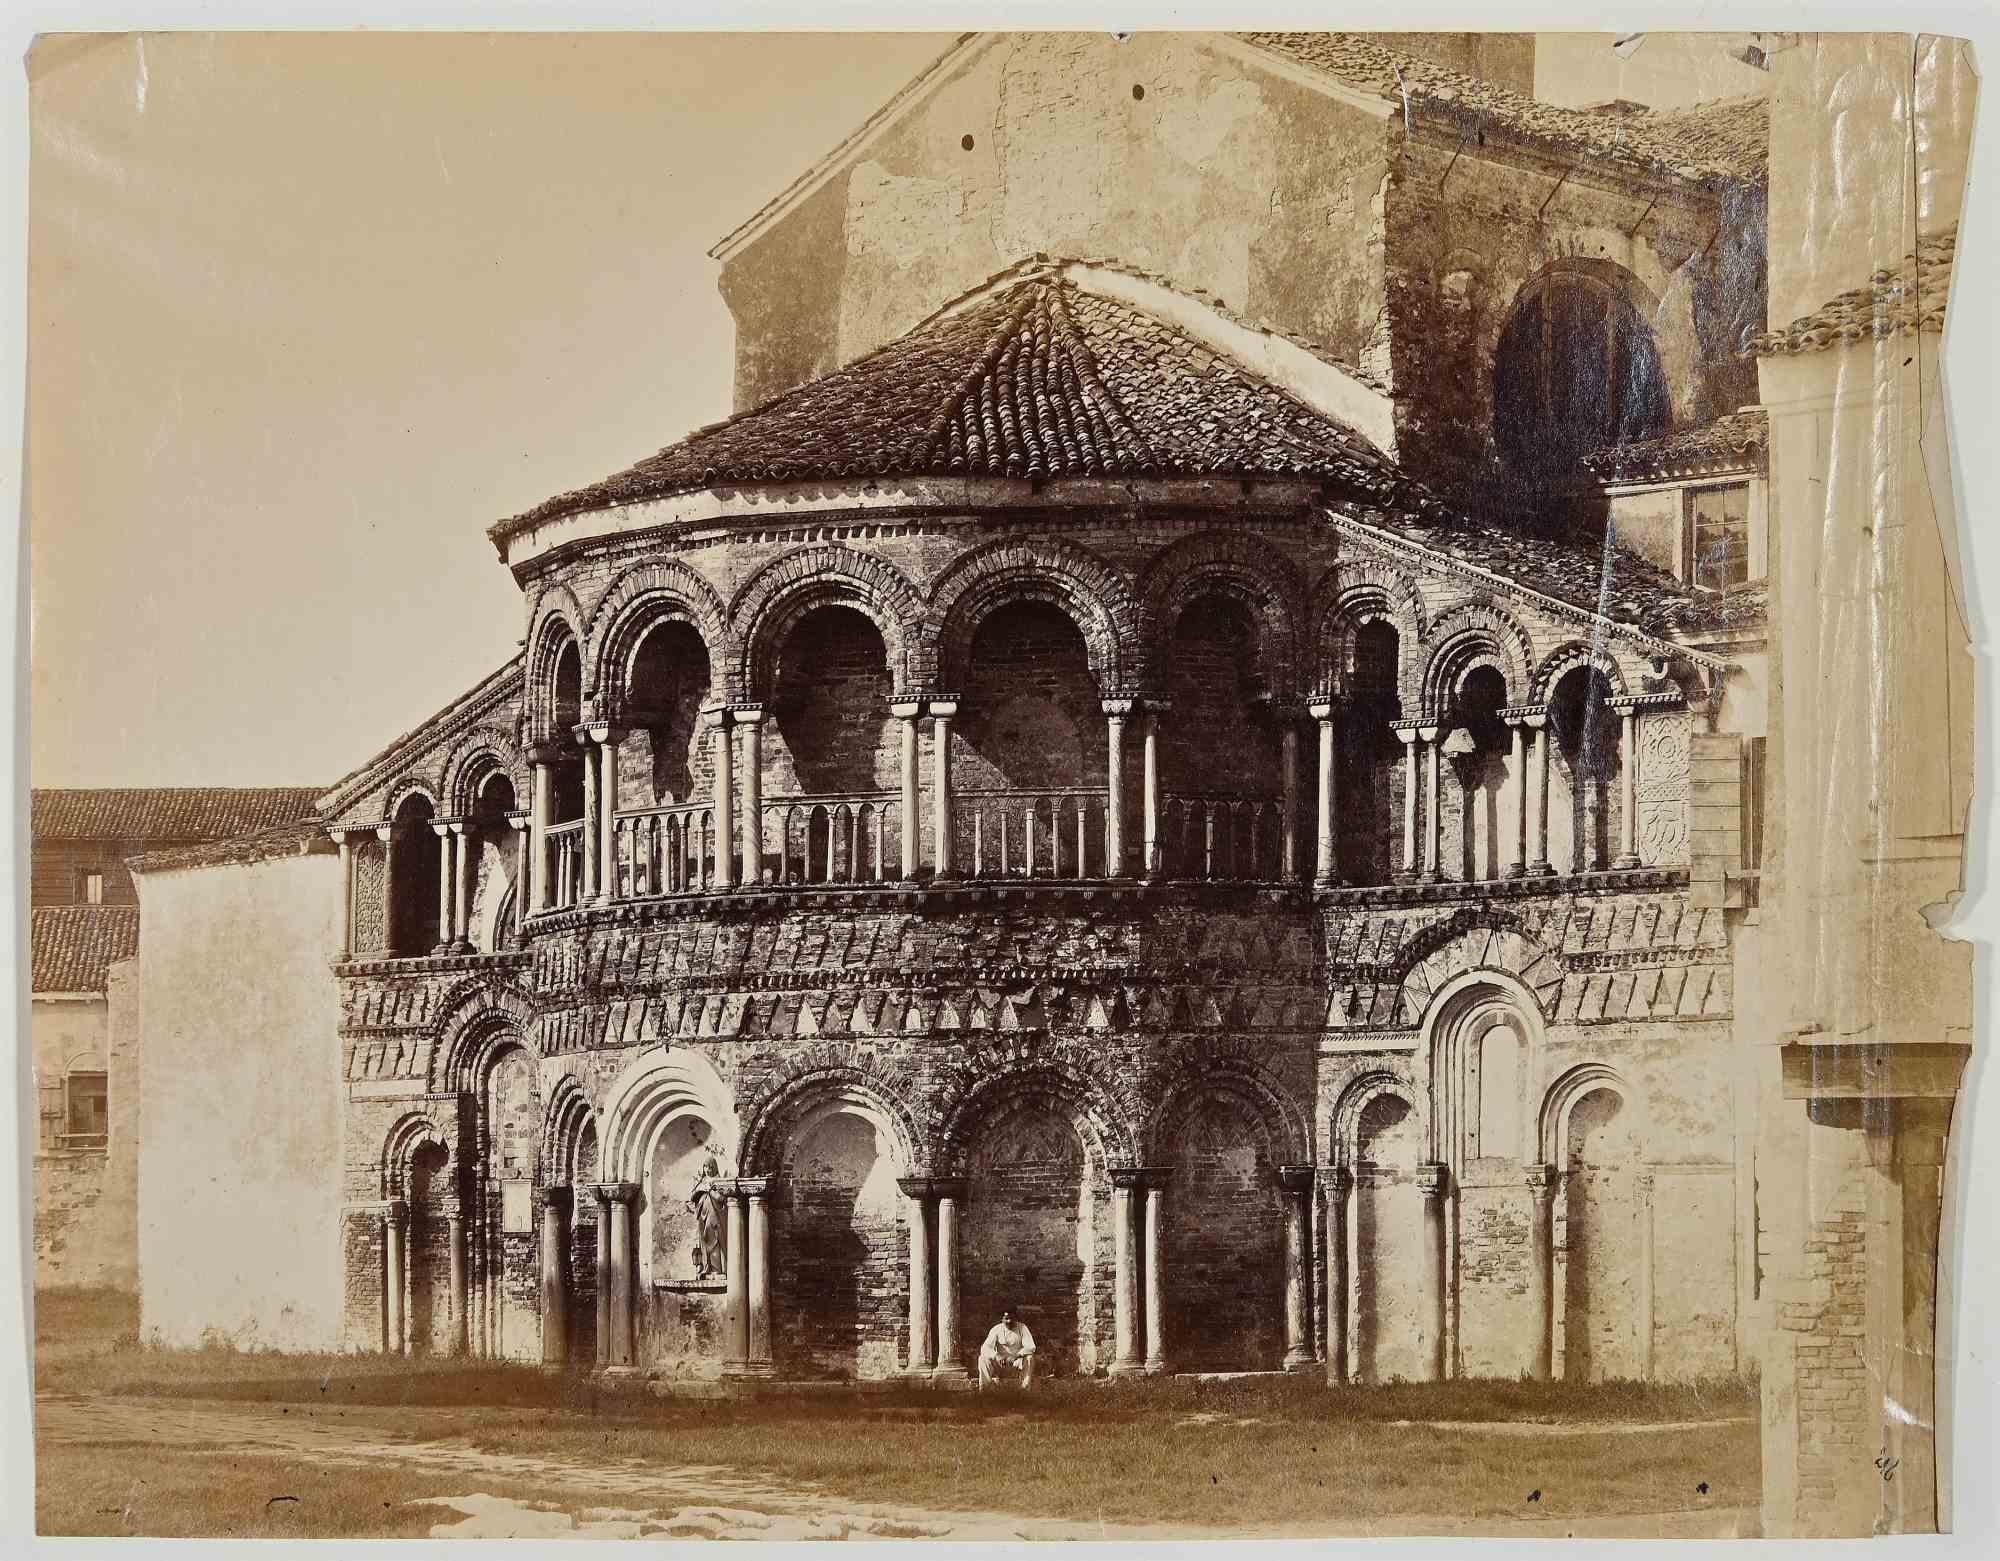 Unknown Landscape Photograph - Cathedral of Murano - Ancient Silver Salt Photograph - Late 19th Century